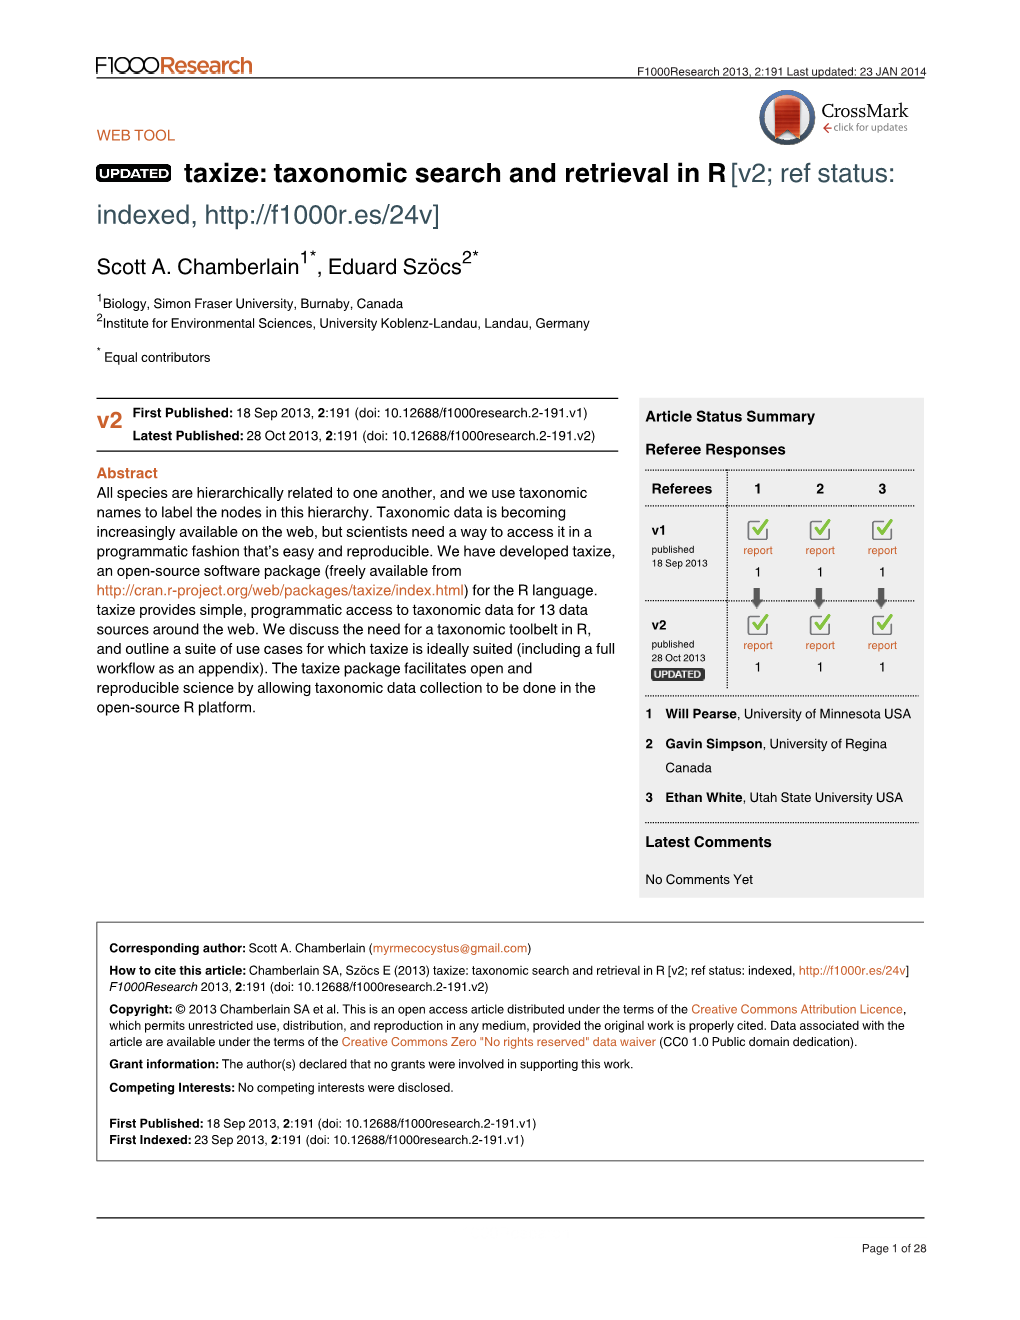 Taxize: Taxonomic Search and Retrieval in R[V2; Ref Status